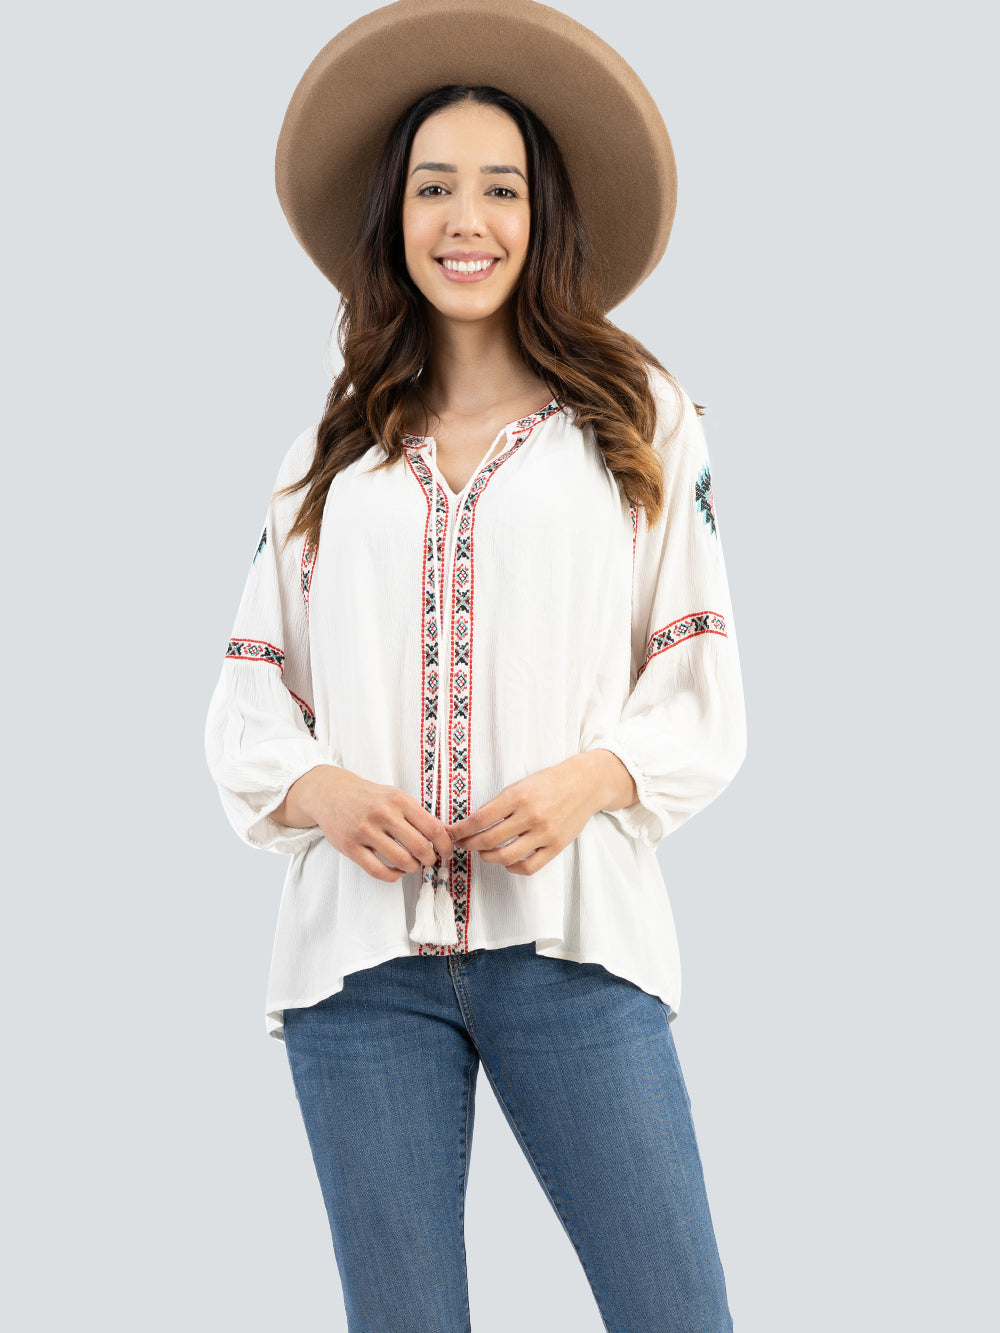 Women's Aztec Embroidered Collection Tie Neck Blouse - Cowgirl Wear